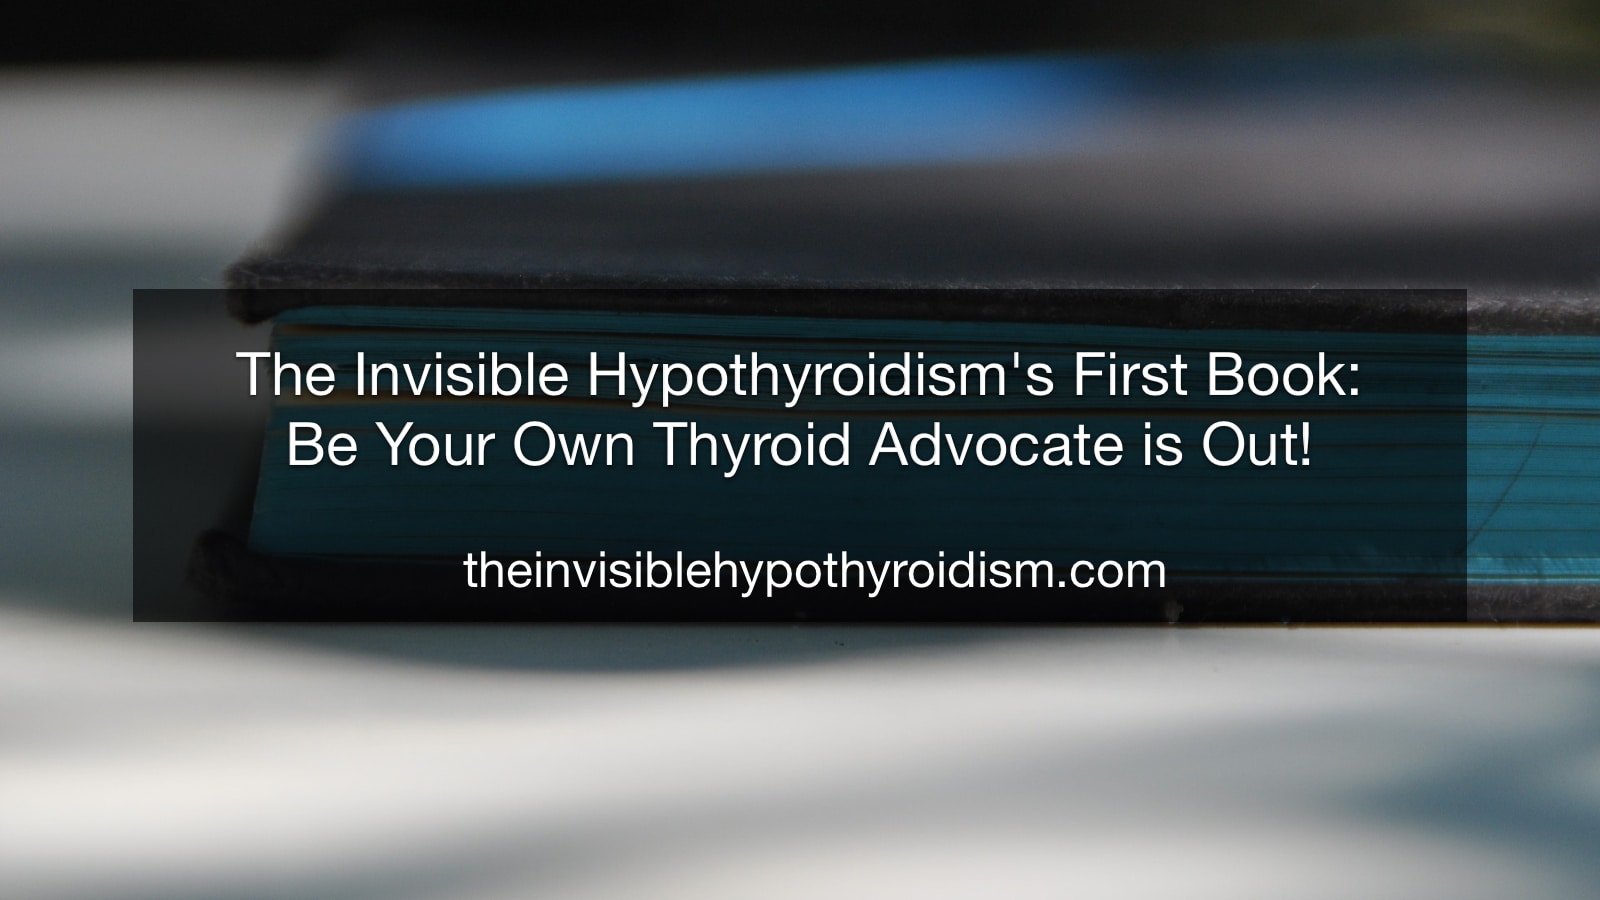 The Invisible Hypothyroidism's First Book: Be Your Own Thyroid Advocate is Out!